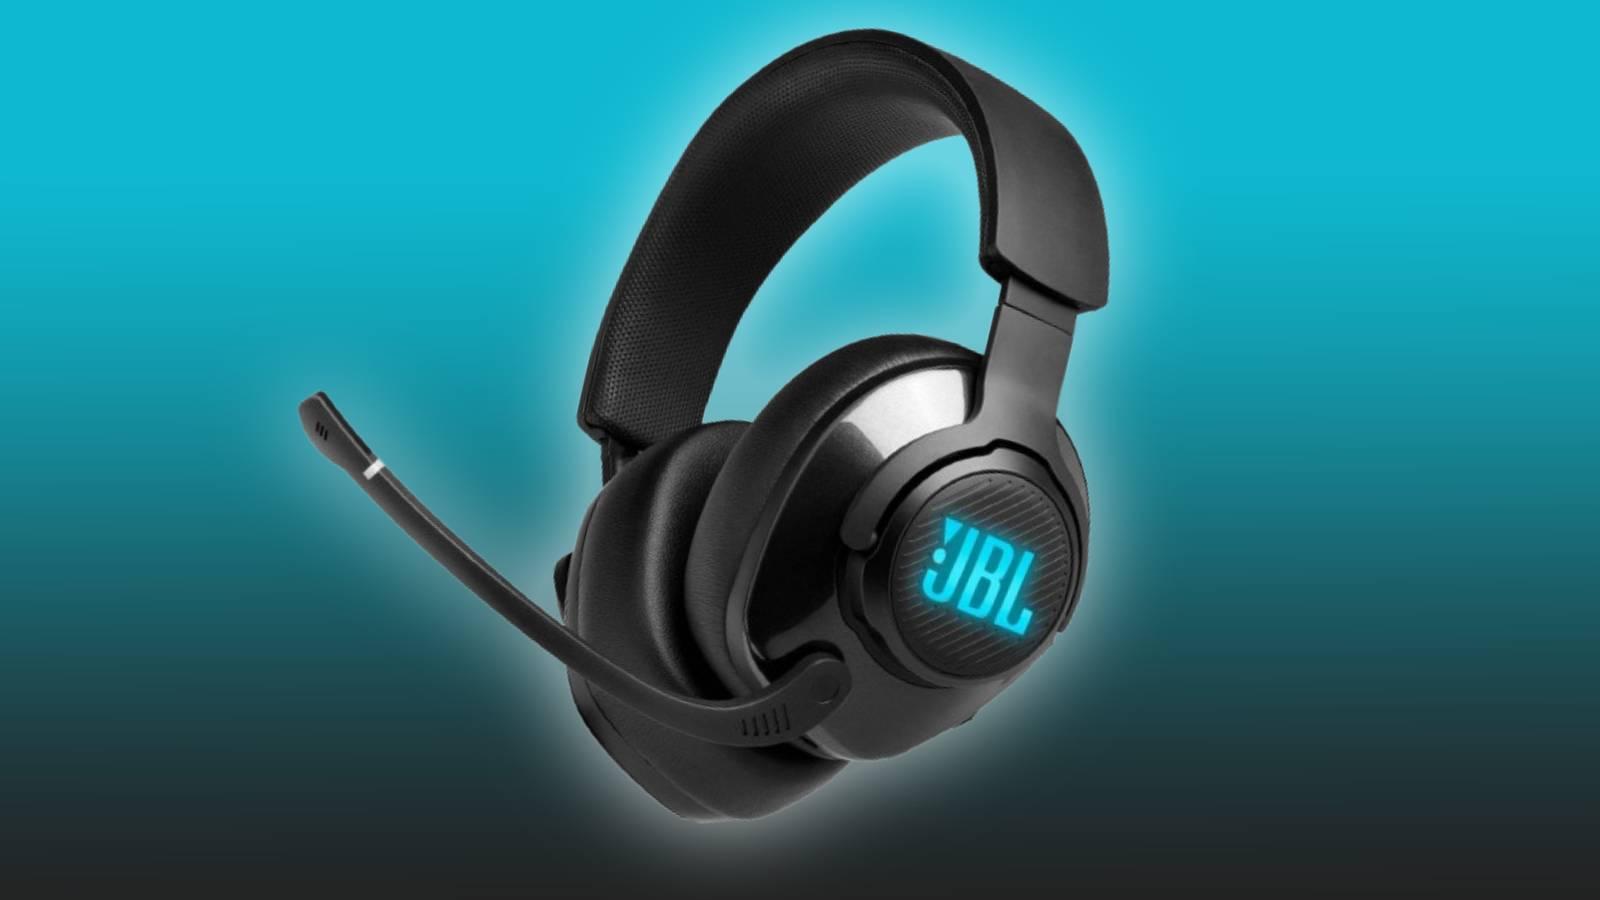 Image of the JBL Quantum 400 - Wired Over-Ear Gaming Headphones.